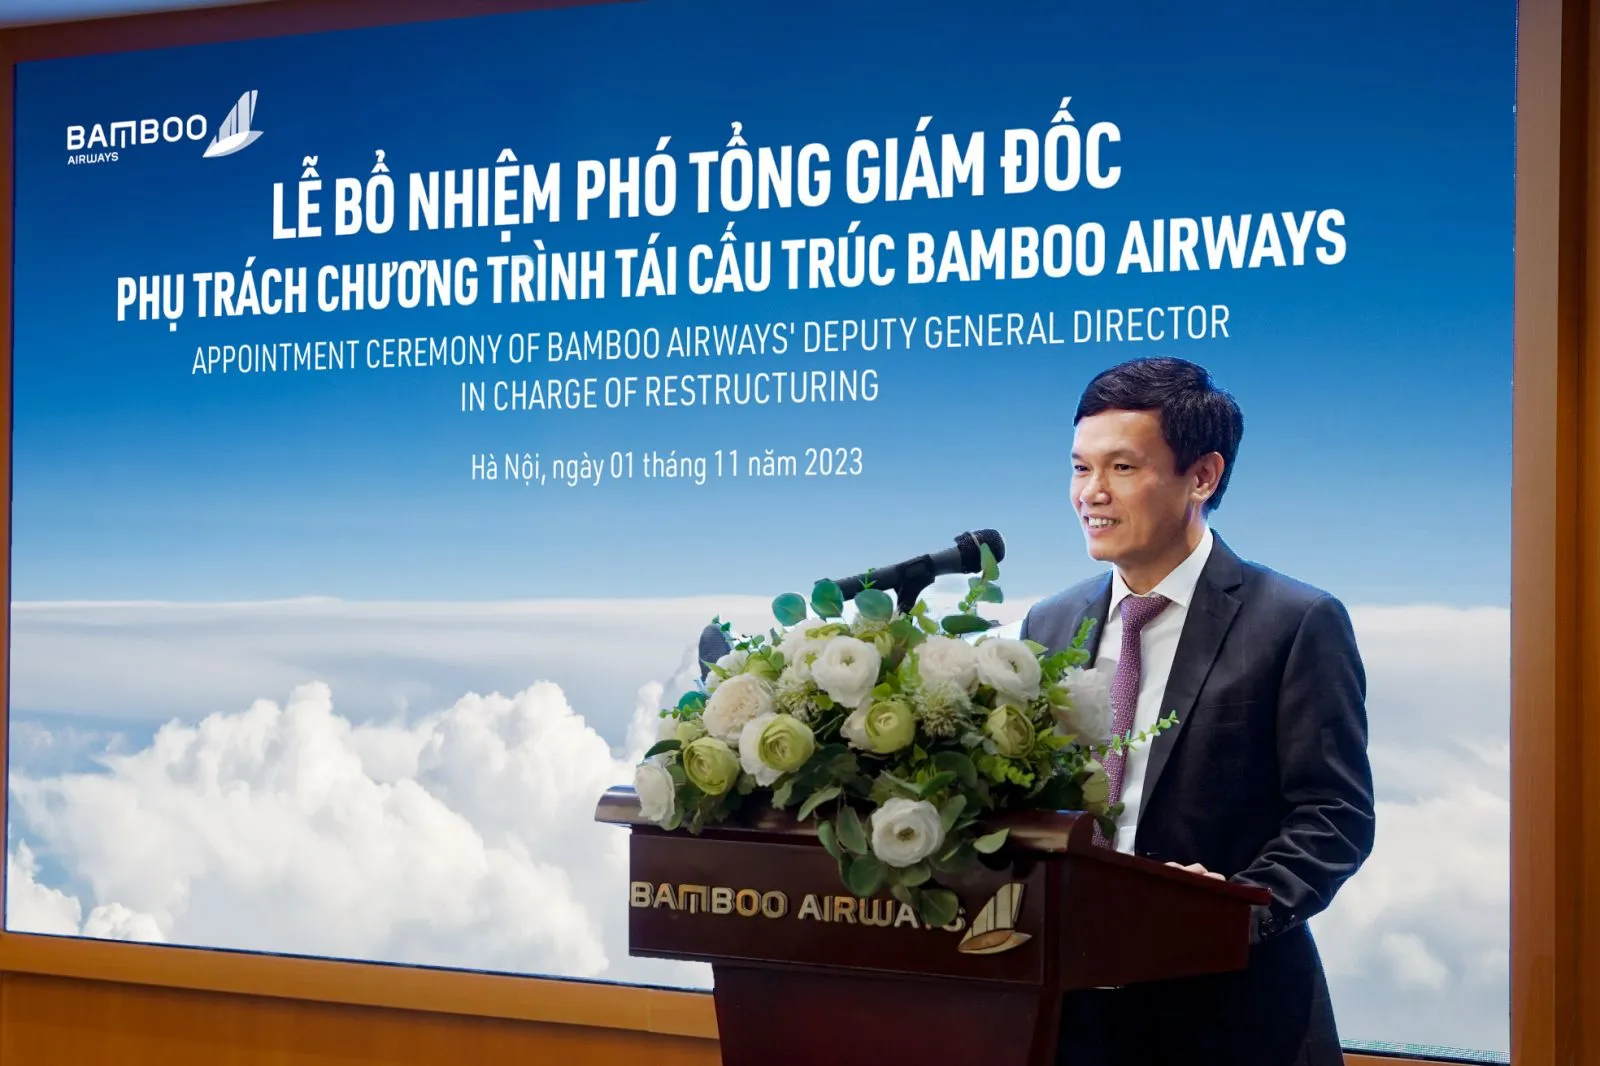 Bamboo Airways appointed Deputy General Director of Restructuring